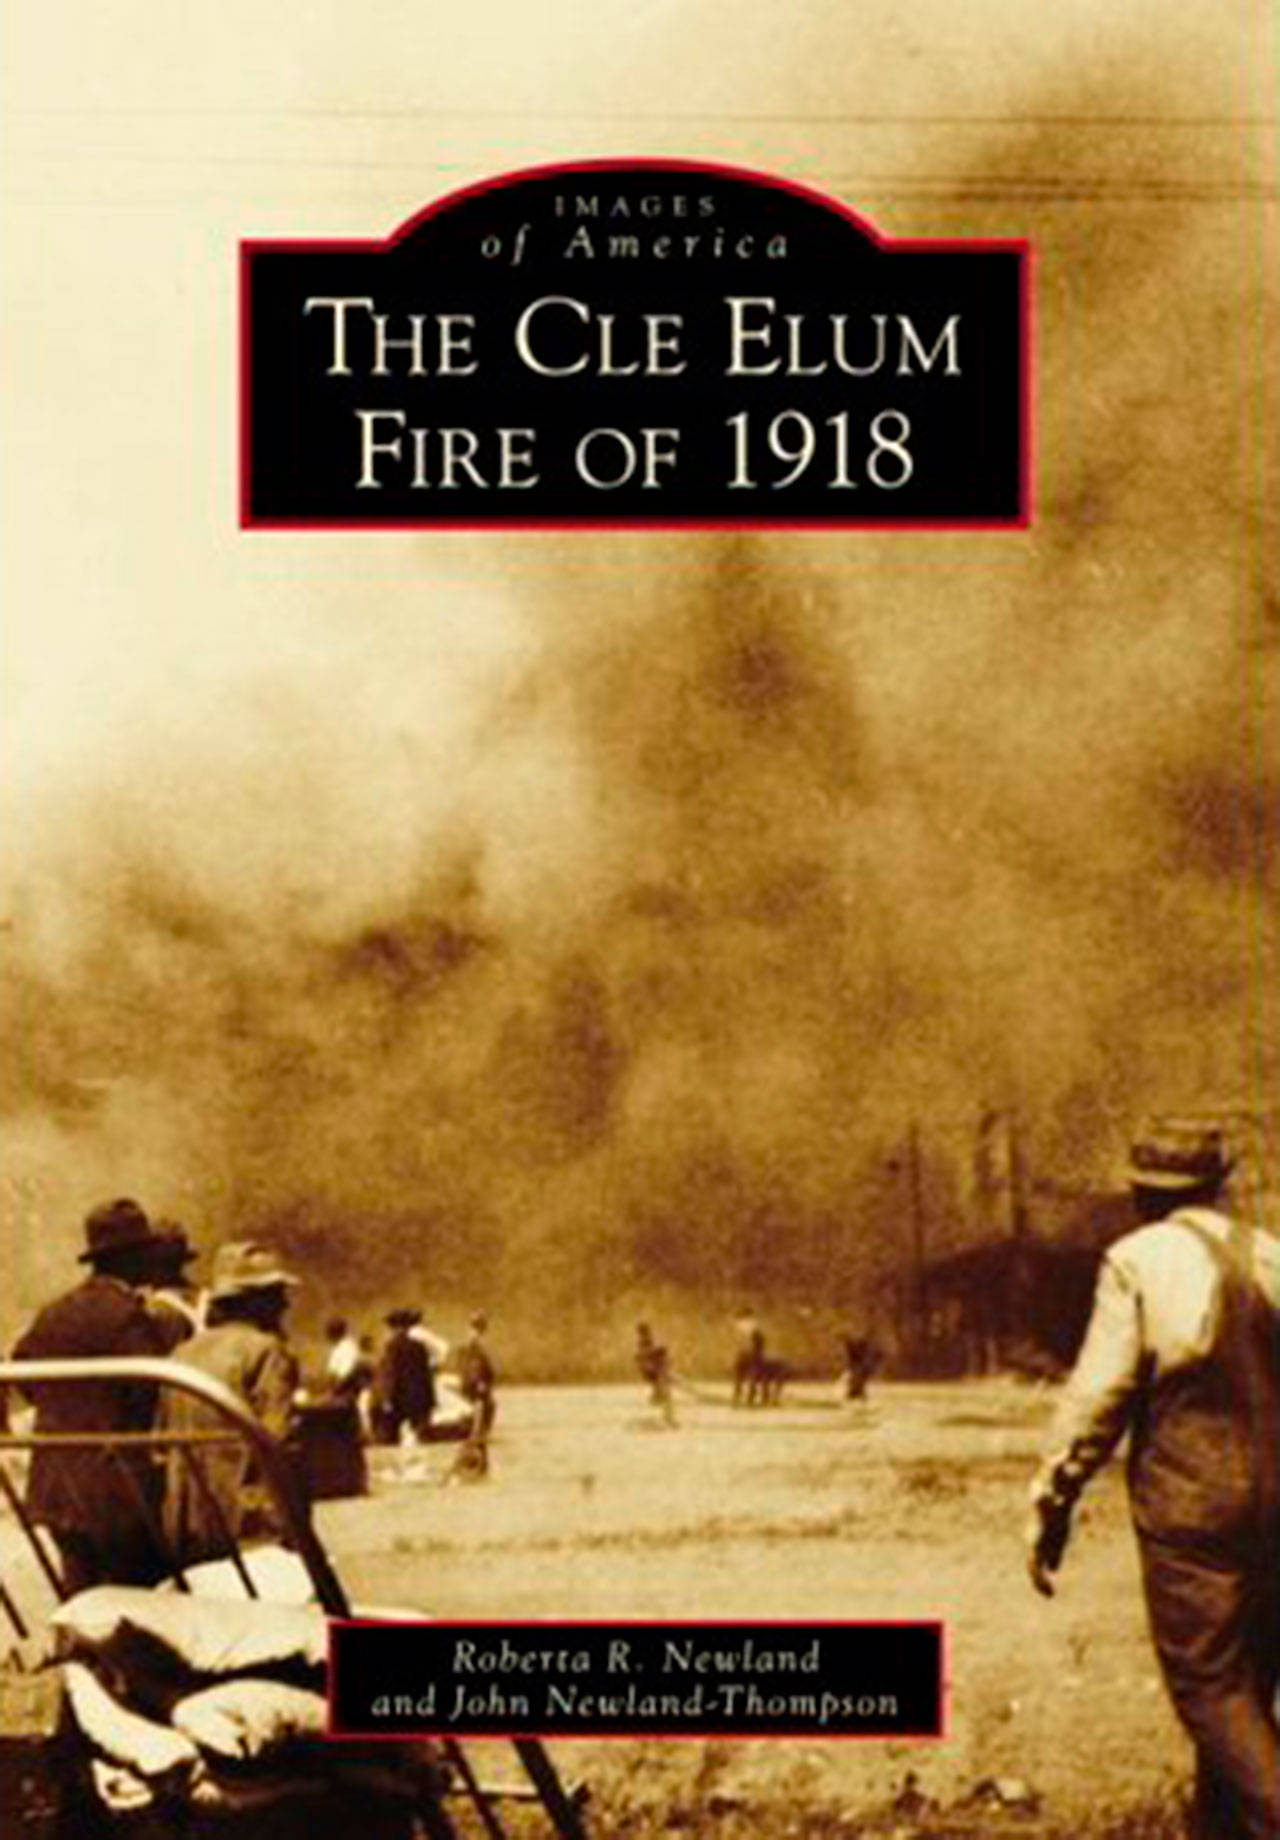 Image courtesy of Eagle Harbor Book Company | Mother/son author duo Roberta Newland and John Newland-Thompson will read from their new book “The Cle Elum Fire of 1918” at 6:30 p.m. Thursday, Aug. 9 at Eagle Harbor Book Company.